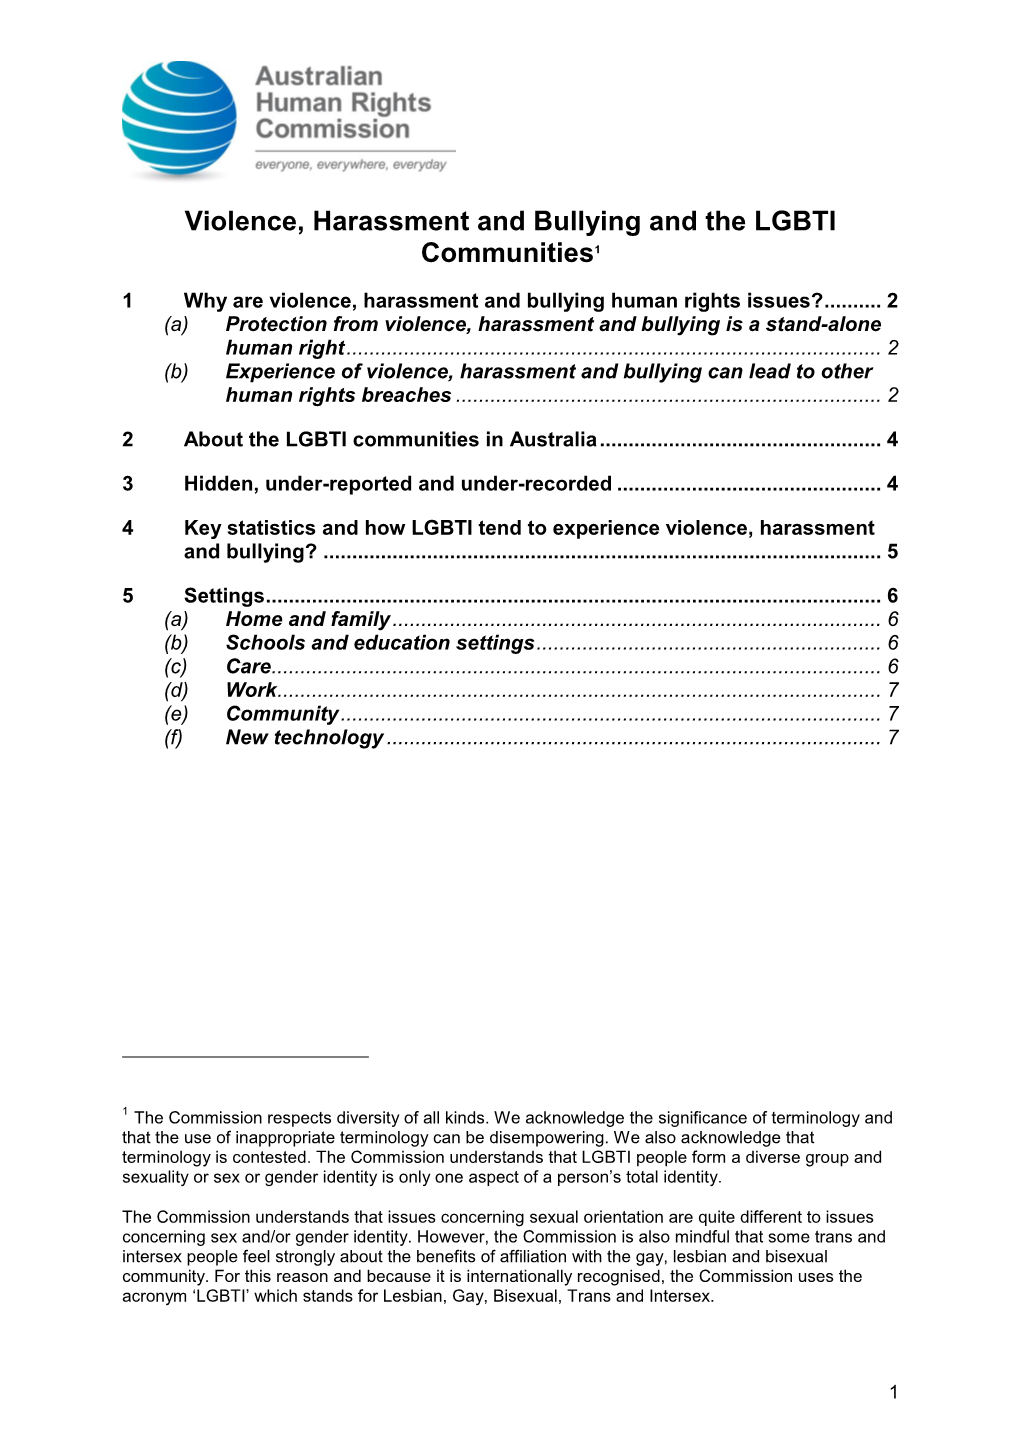 Violence, Harassment and Bullying and the LGBTI Communities1